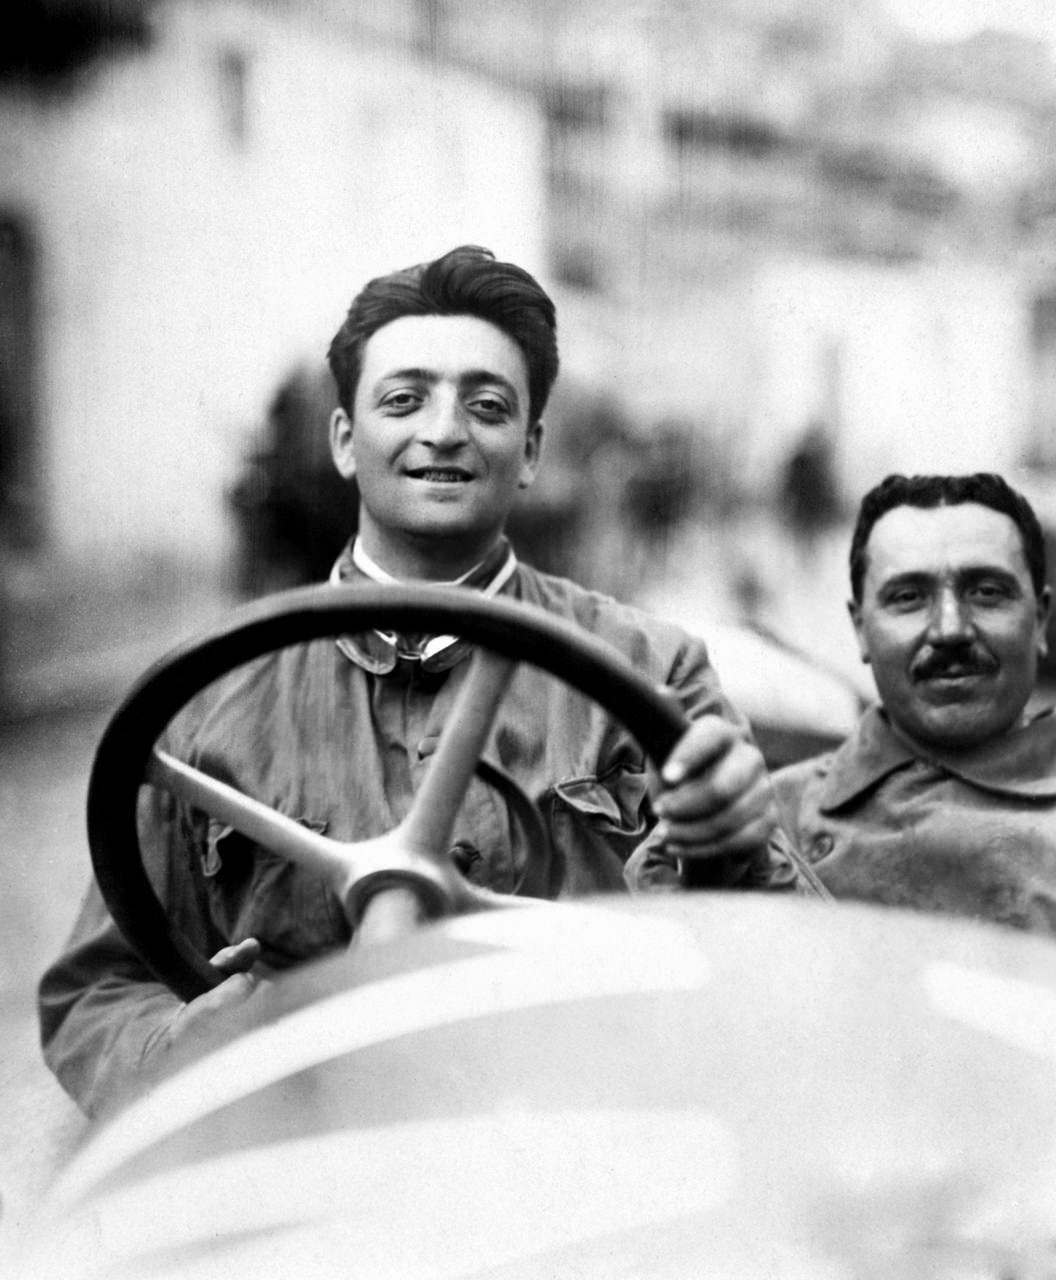 This beautiful old image shows Enzo Ferrari as a young man (on the left), he was racing in the 1920 Targa